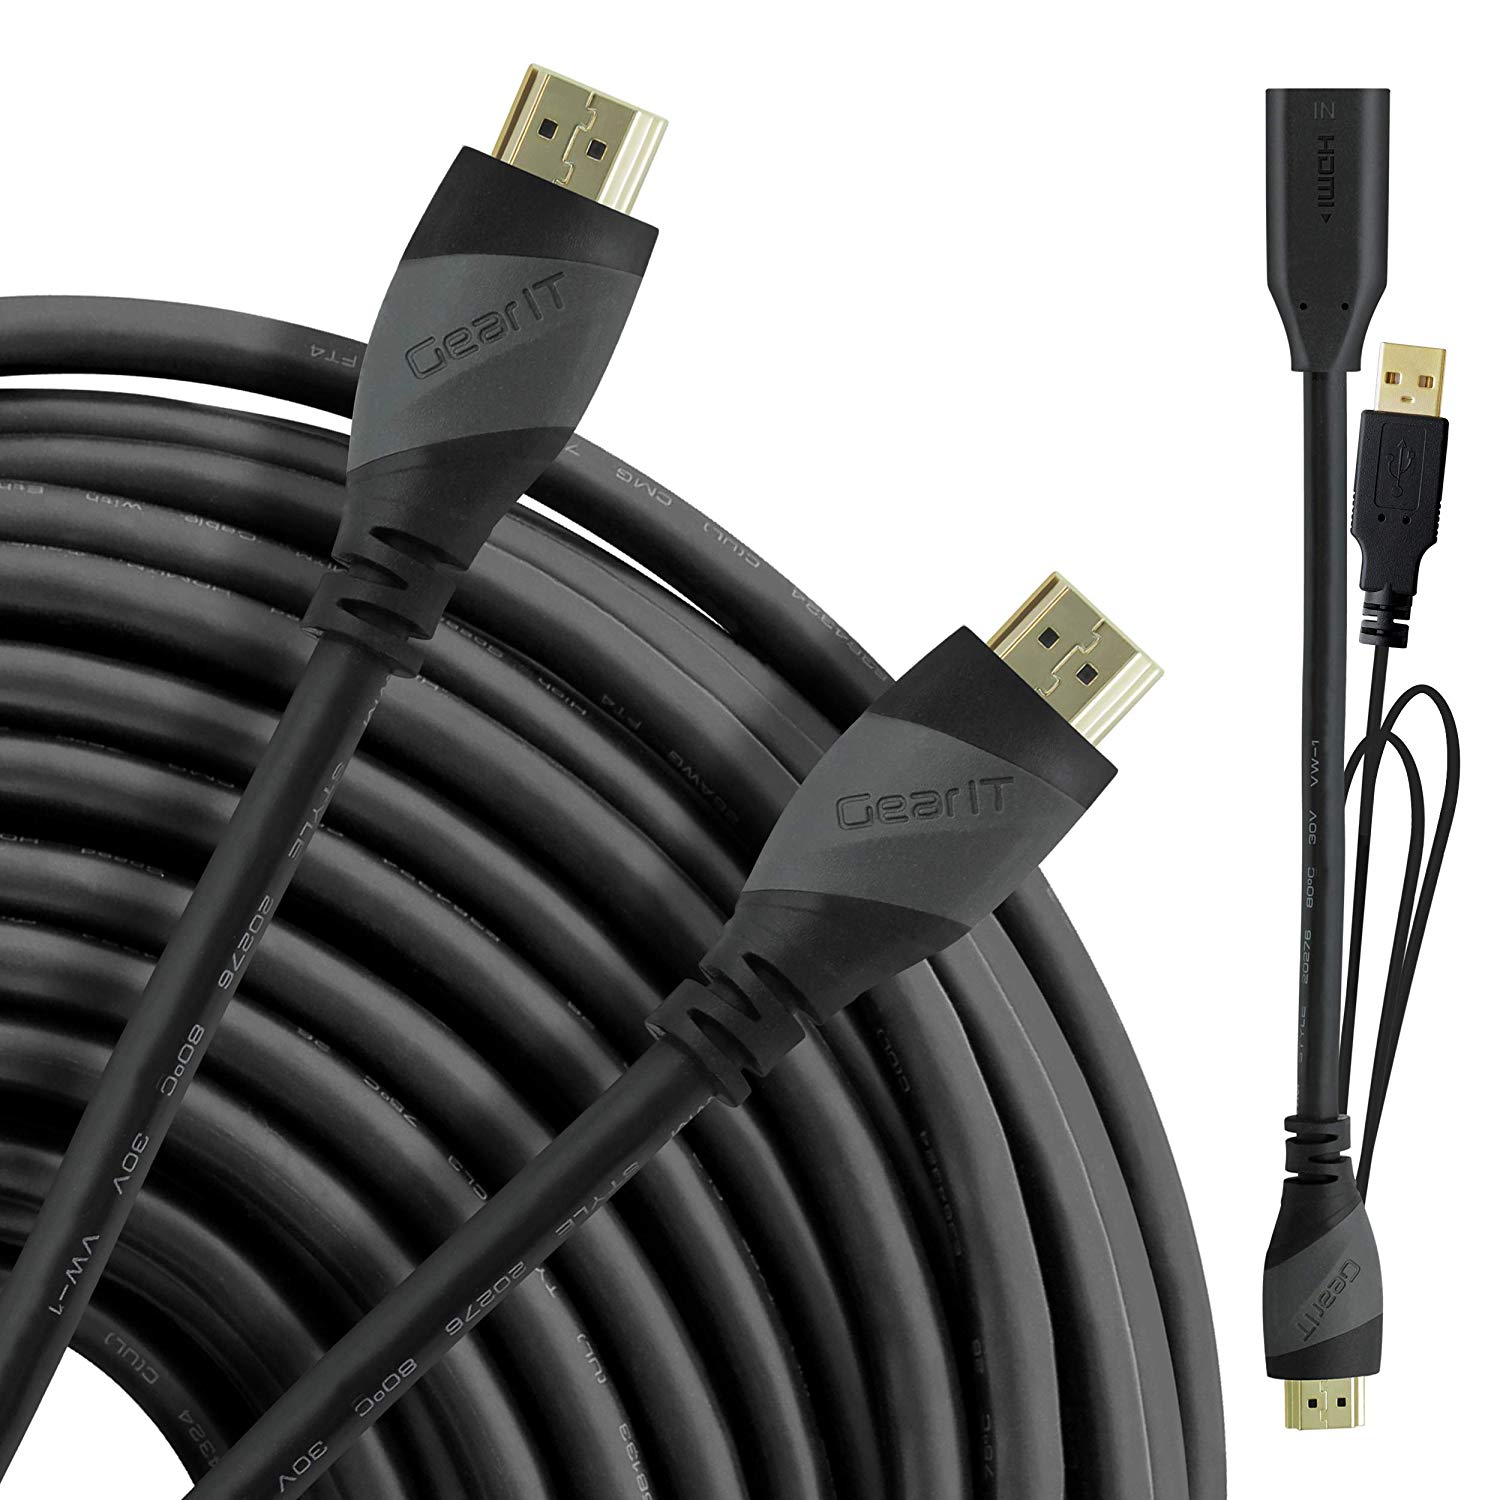 Buy Bandridge SVL1003 3 m FHD High Speed HDMI Cable at Best Price